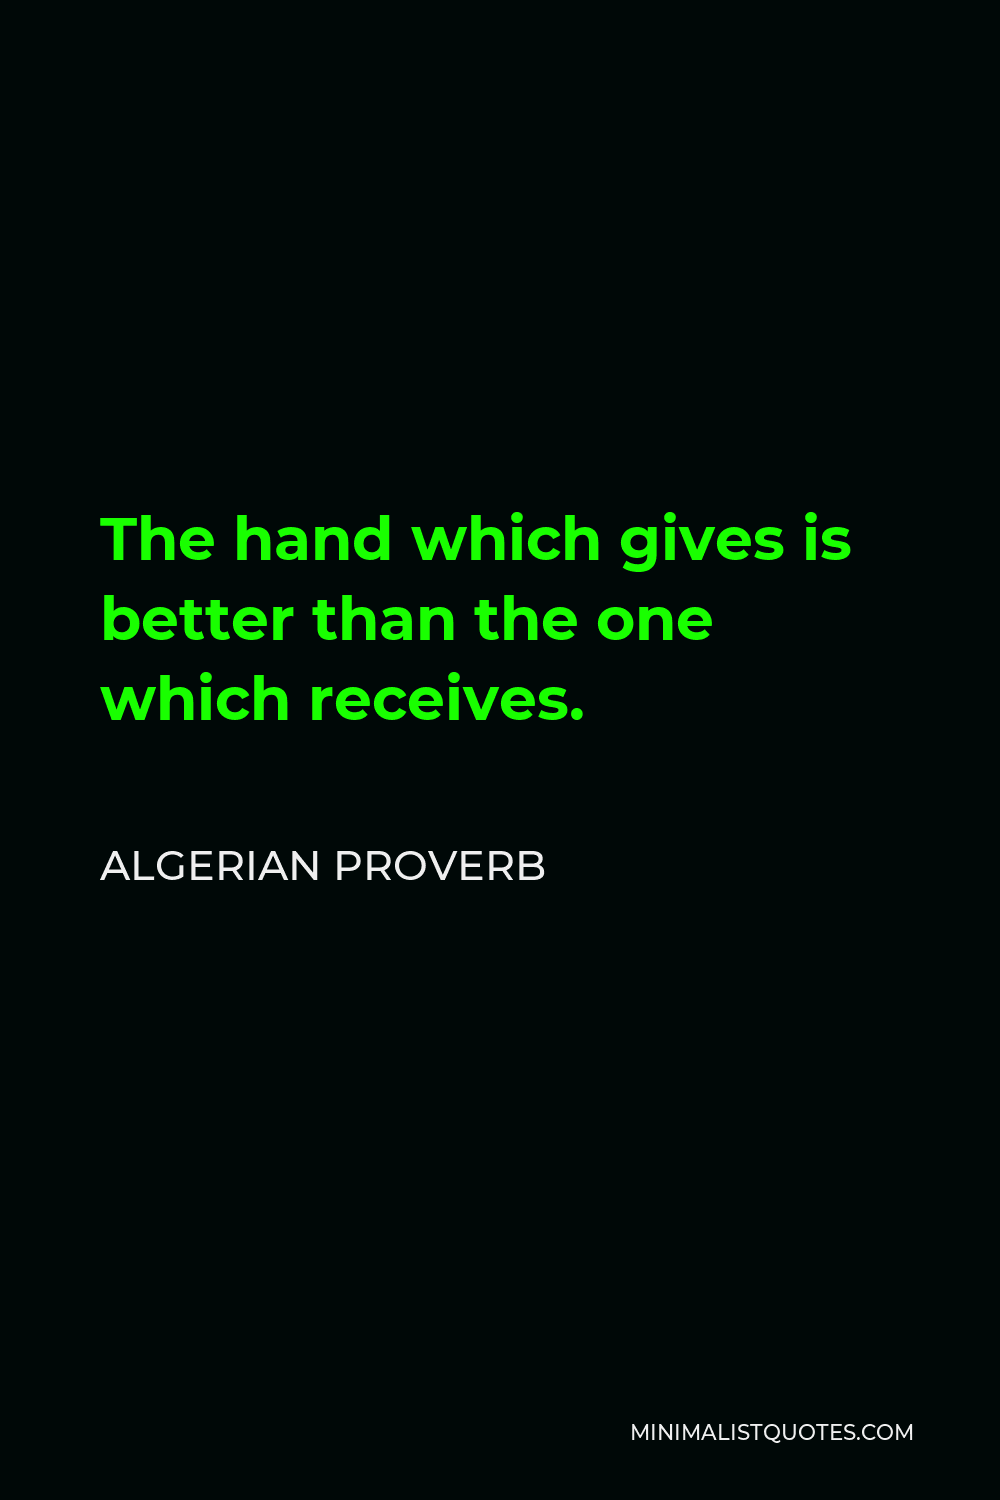 Algerian Proverb Quote - The hand which gives is better than the one which receives.